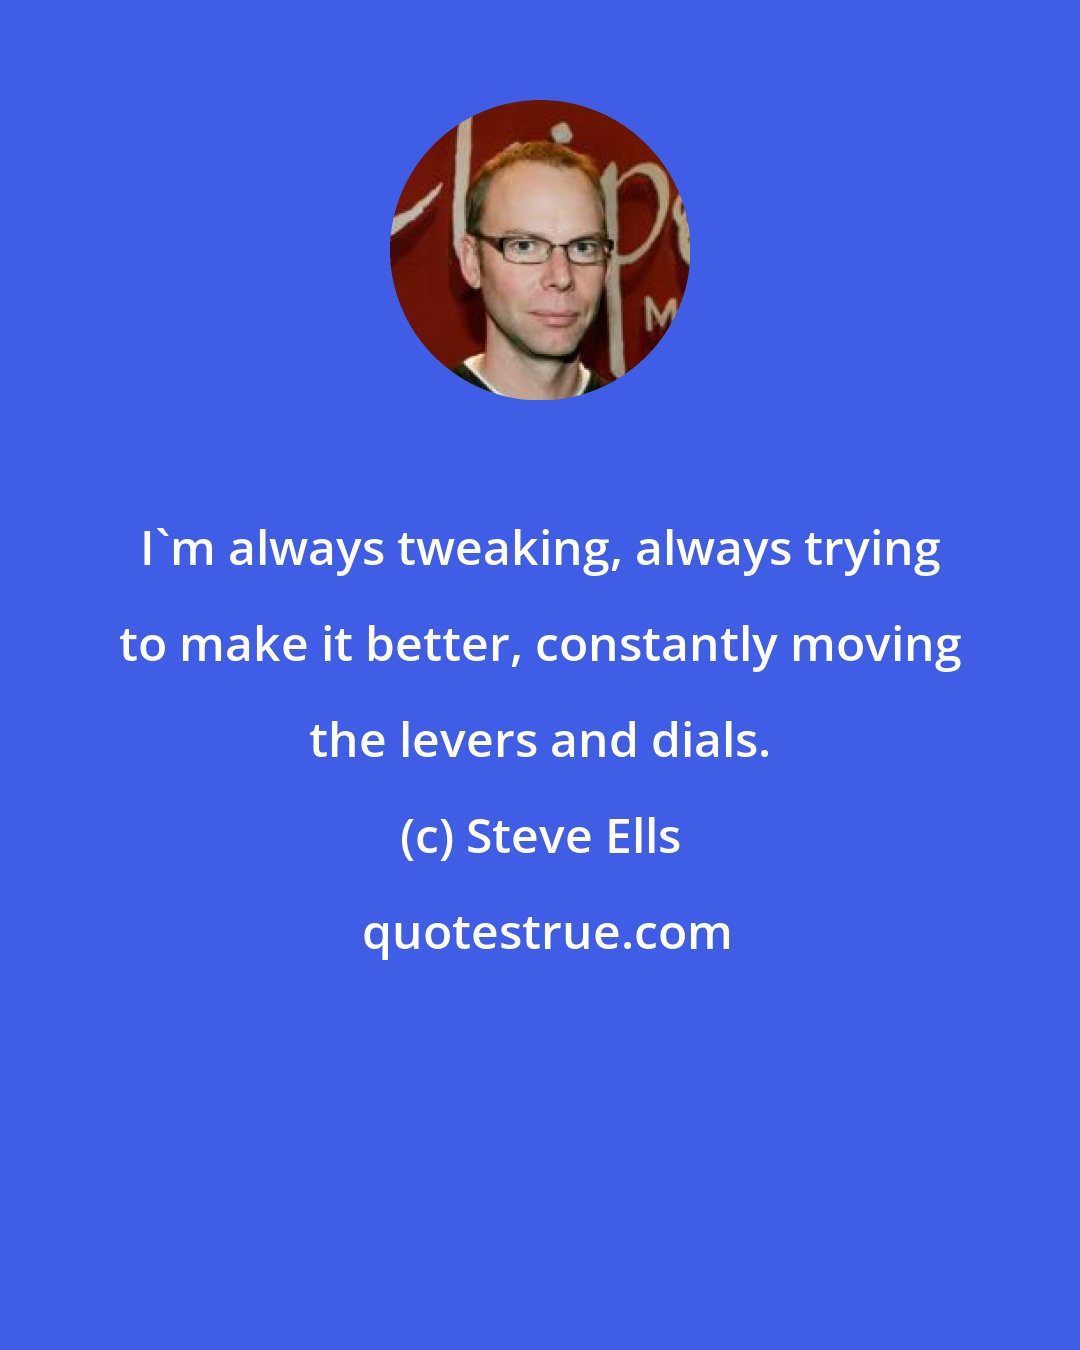 Steve Ells: I'm always tweaking, always trying to make it better, constantly moving the levers and dials.